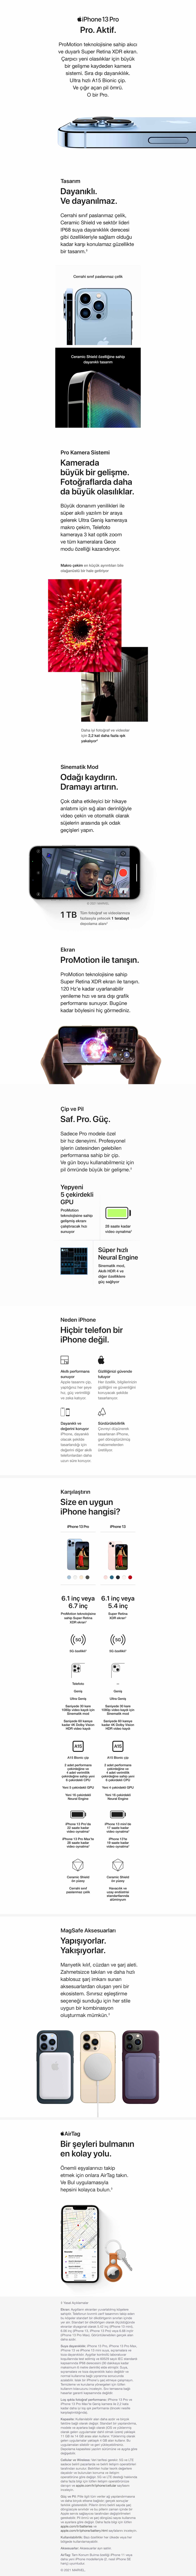 iPhone_13_Pro_Marketing_Page_Avail_S__TR-min_2.jpg (1468×19315)